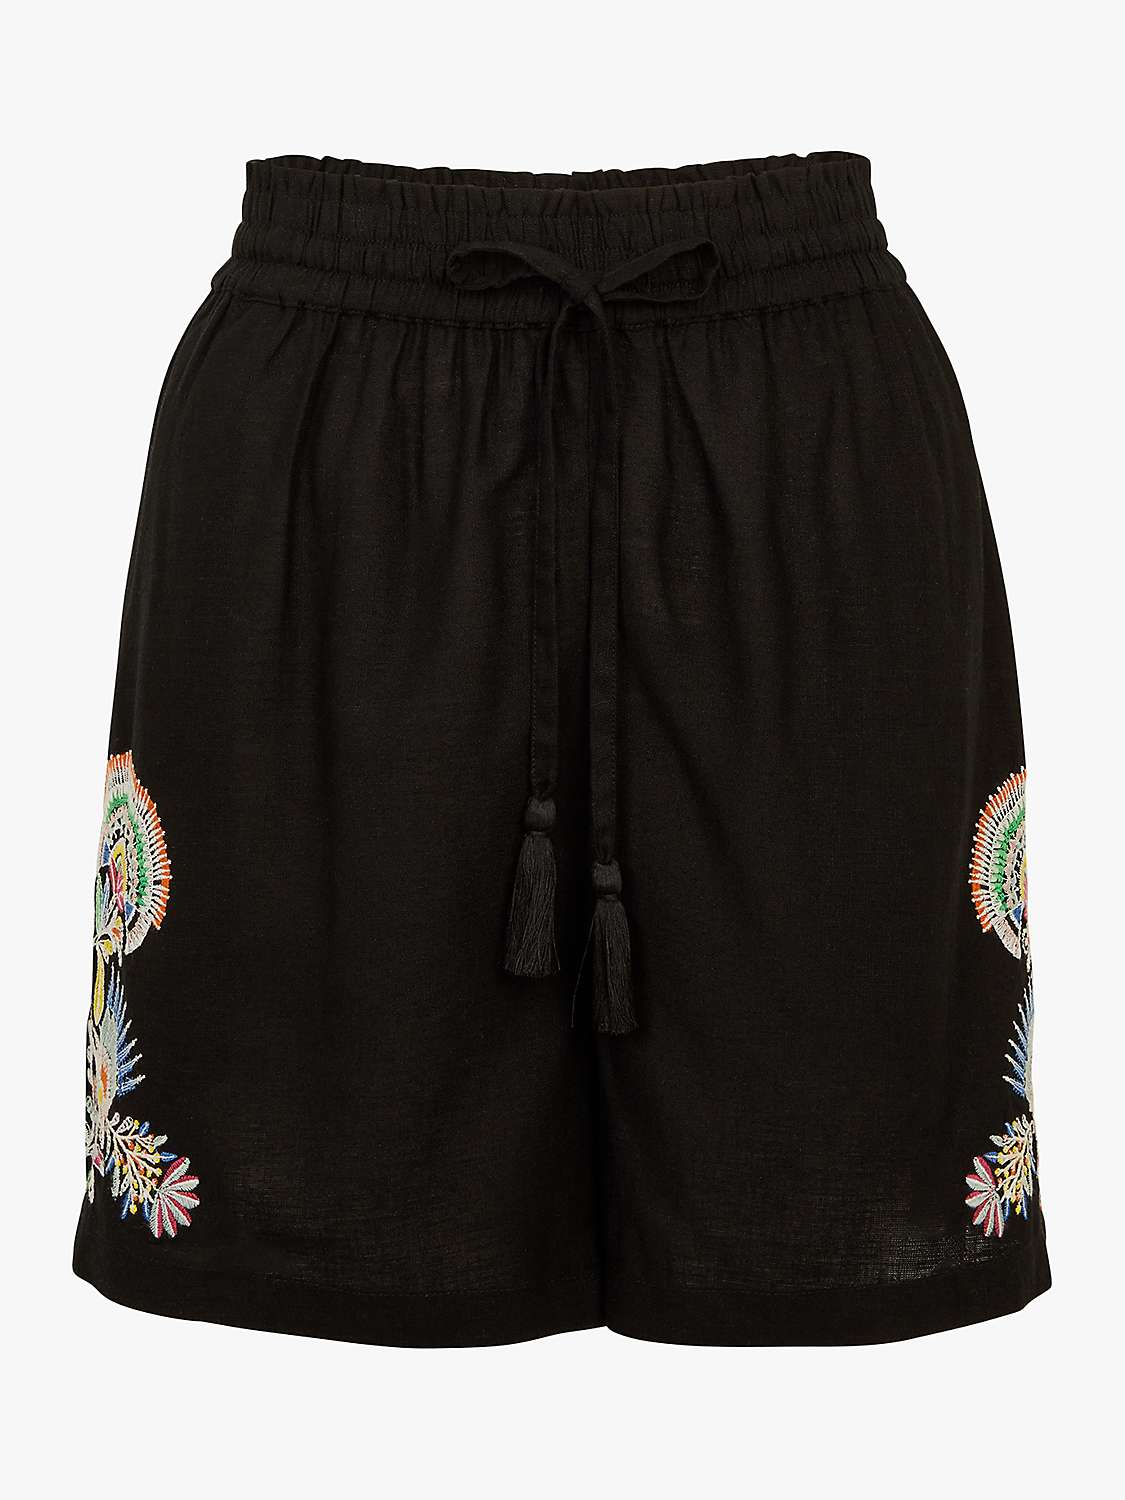 Buy Accessorize Embroidered Linen Shorts, Black/Multi Online at johnlewis.com